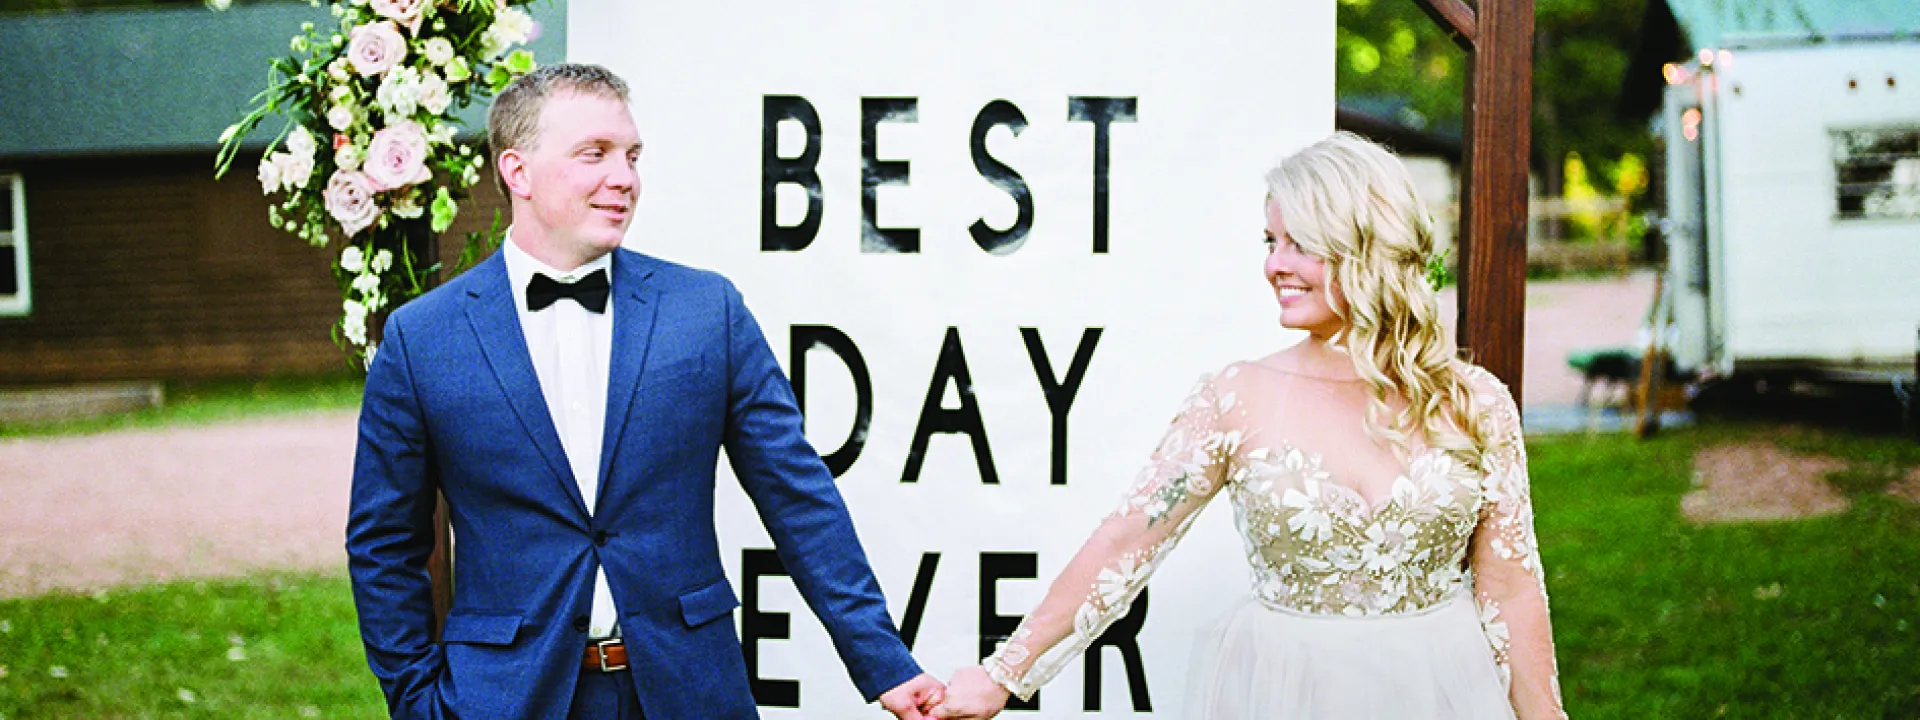 Ashley Zelenka and Evan Bohman hold hands in front of a Best Day Ever sign at their rustic camp wedding.